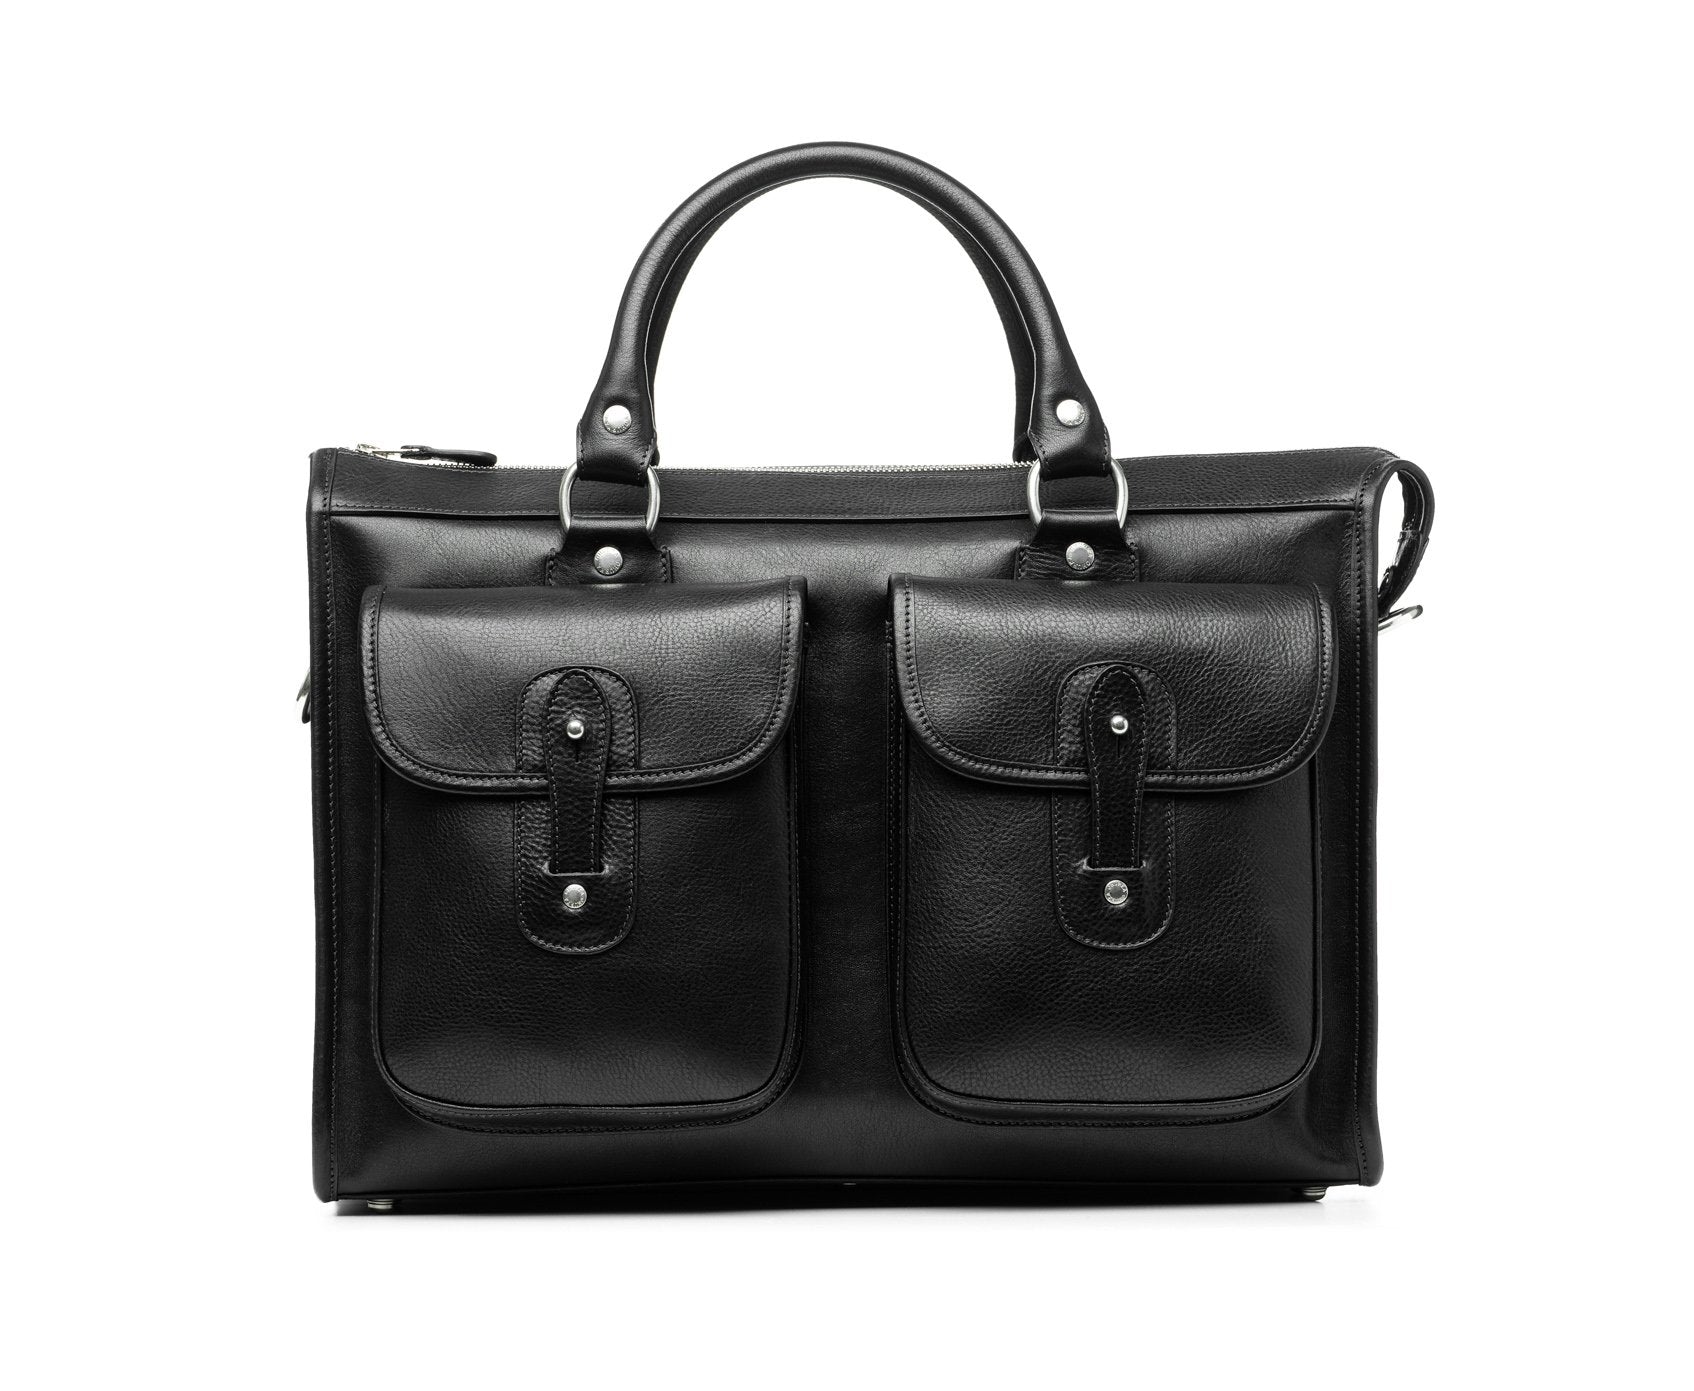 Examiner No. 5 | Vintage Black Leather Briefcase | Iconic Ghurka Style